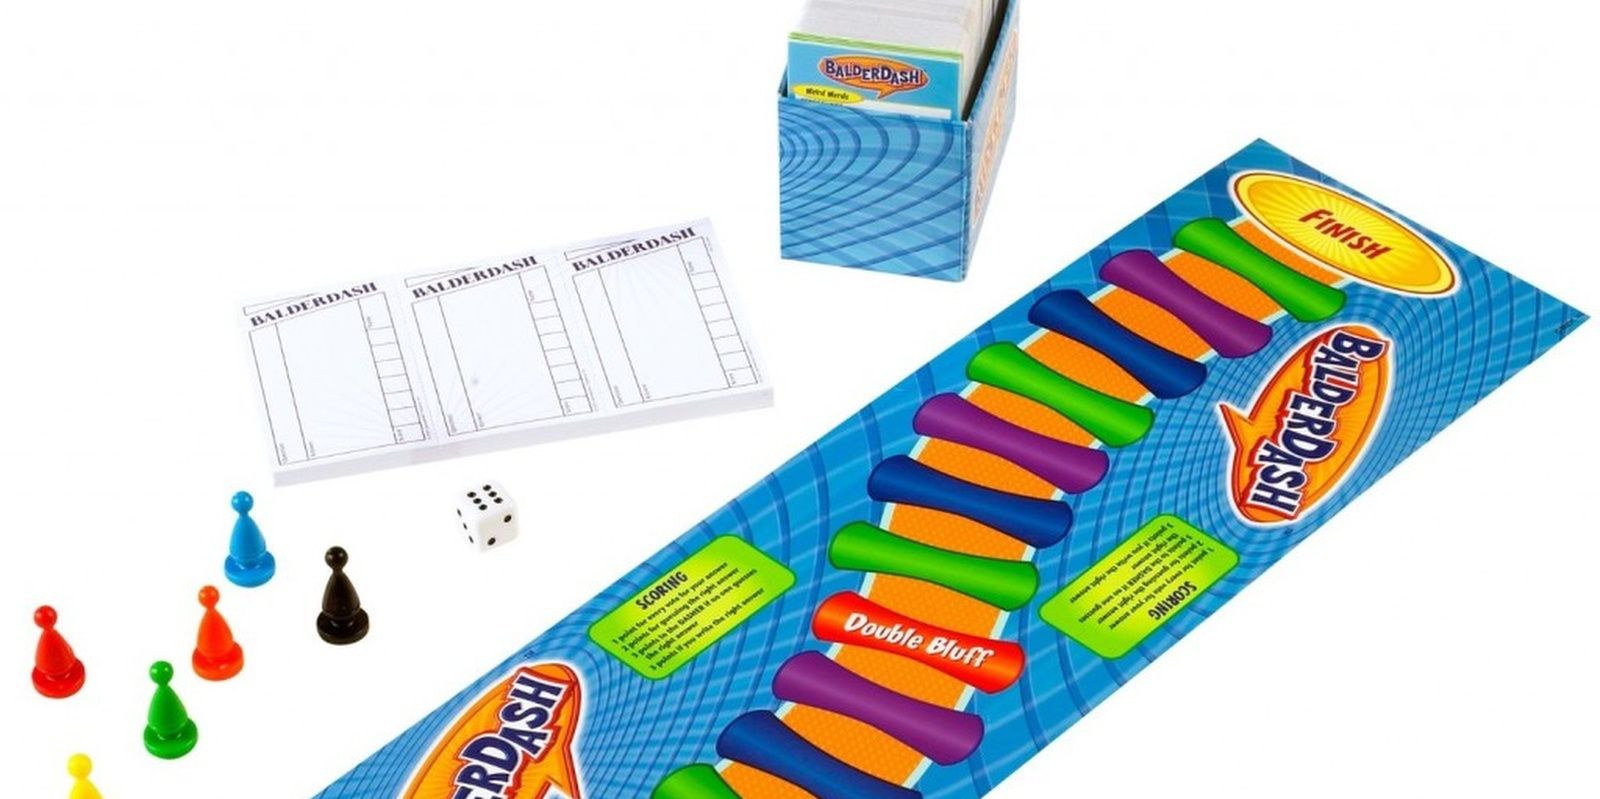 Balderdash Board Game Scoring Track Pawns Dice And Deck Of Cards